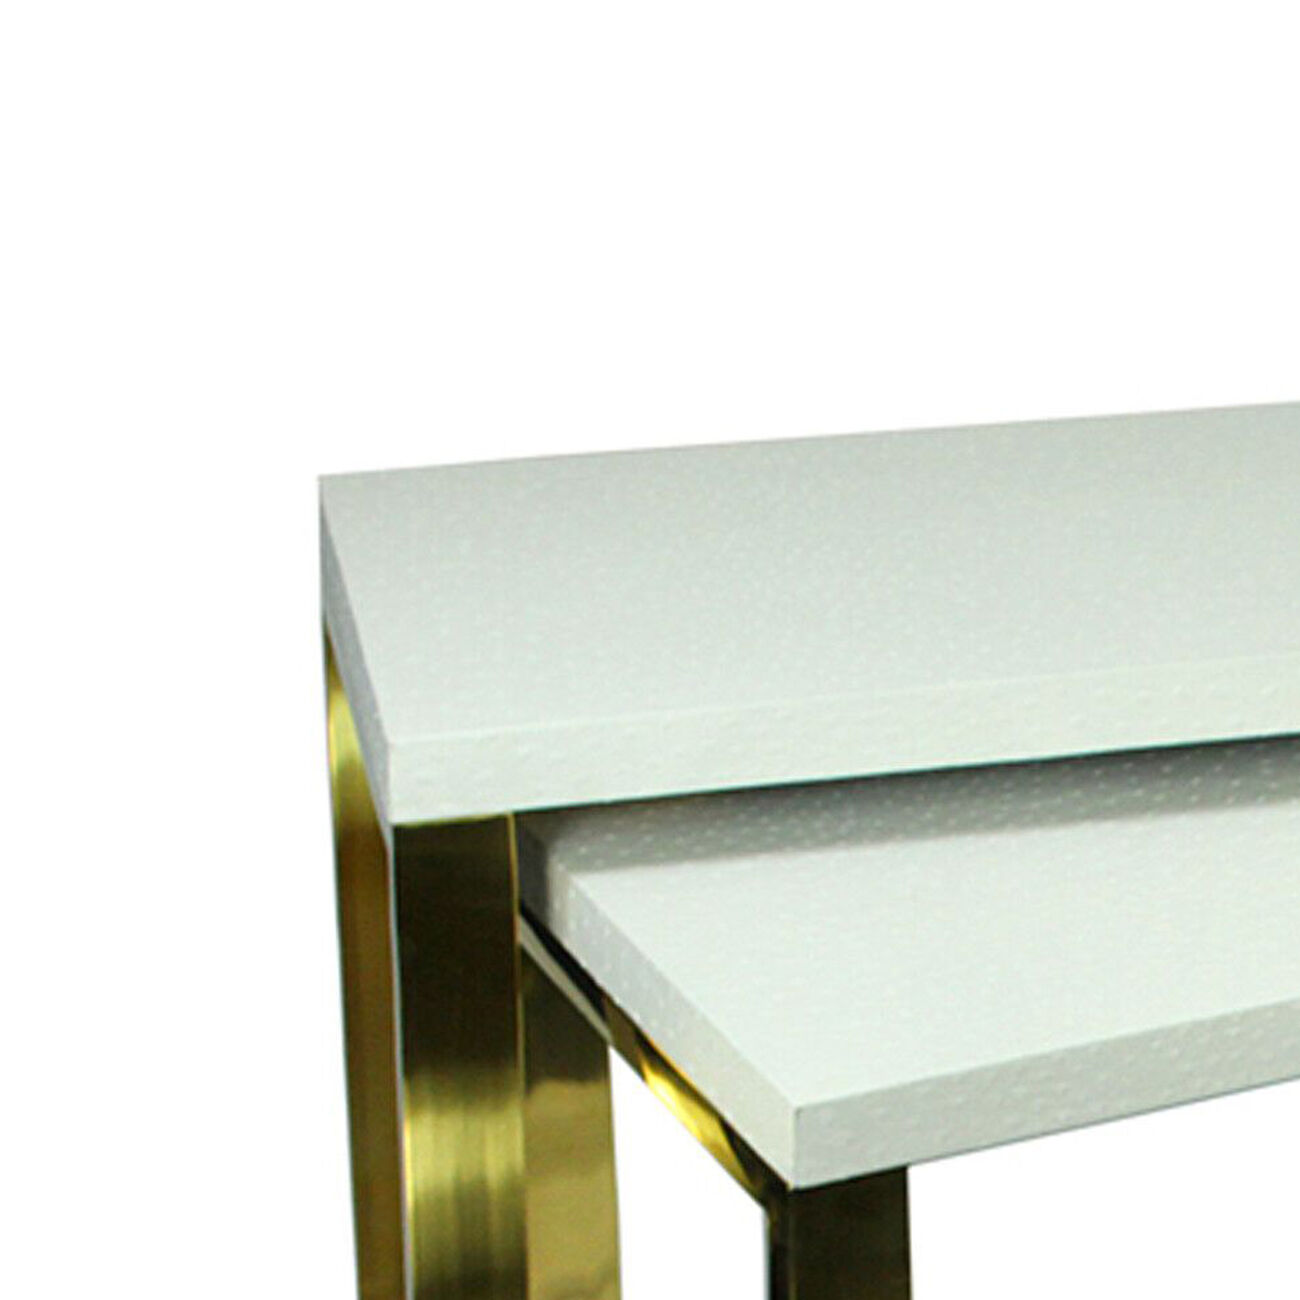 Rectangular Wood and Metal Console Tables, White and Gold, Set of 2.